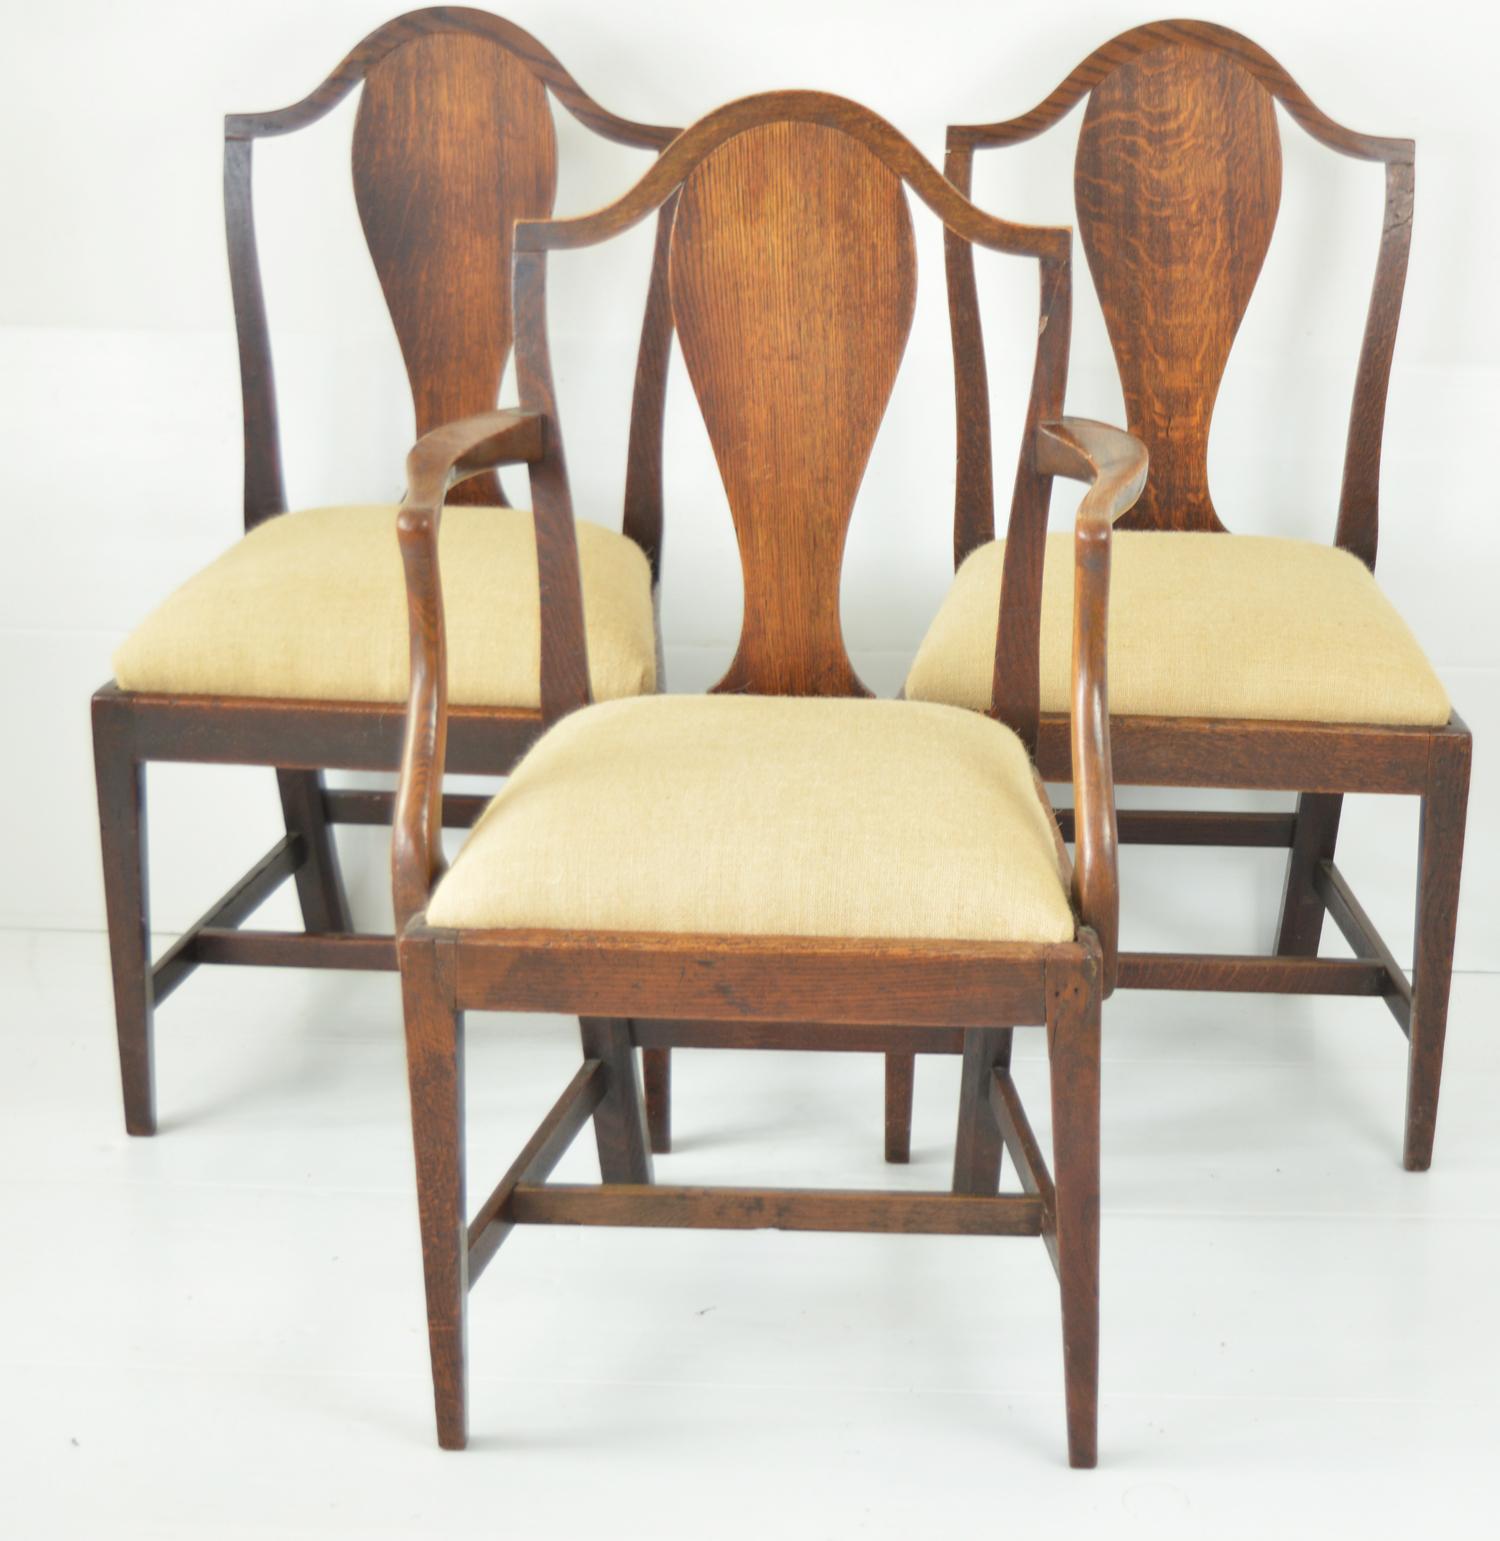 A great set of 6 ( 4 + 2 ) oak country chairs.

Lovely colour.

In the Country Hepplewhite style.

I particularly like the unusual plain shield shape splats.

The seats have been re-upholstered in hessian or burlap.

The chairs are